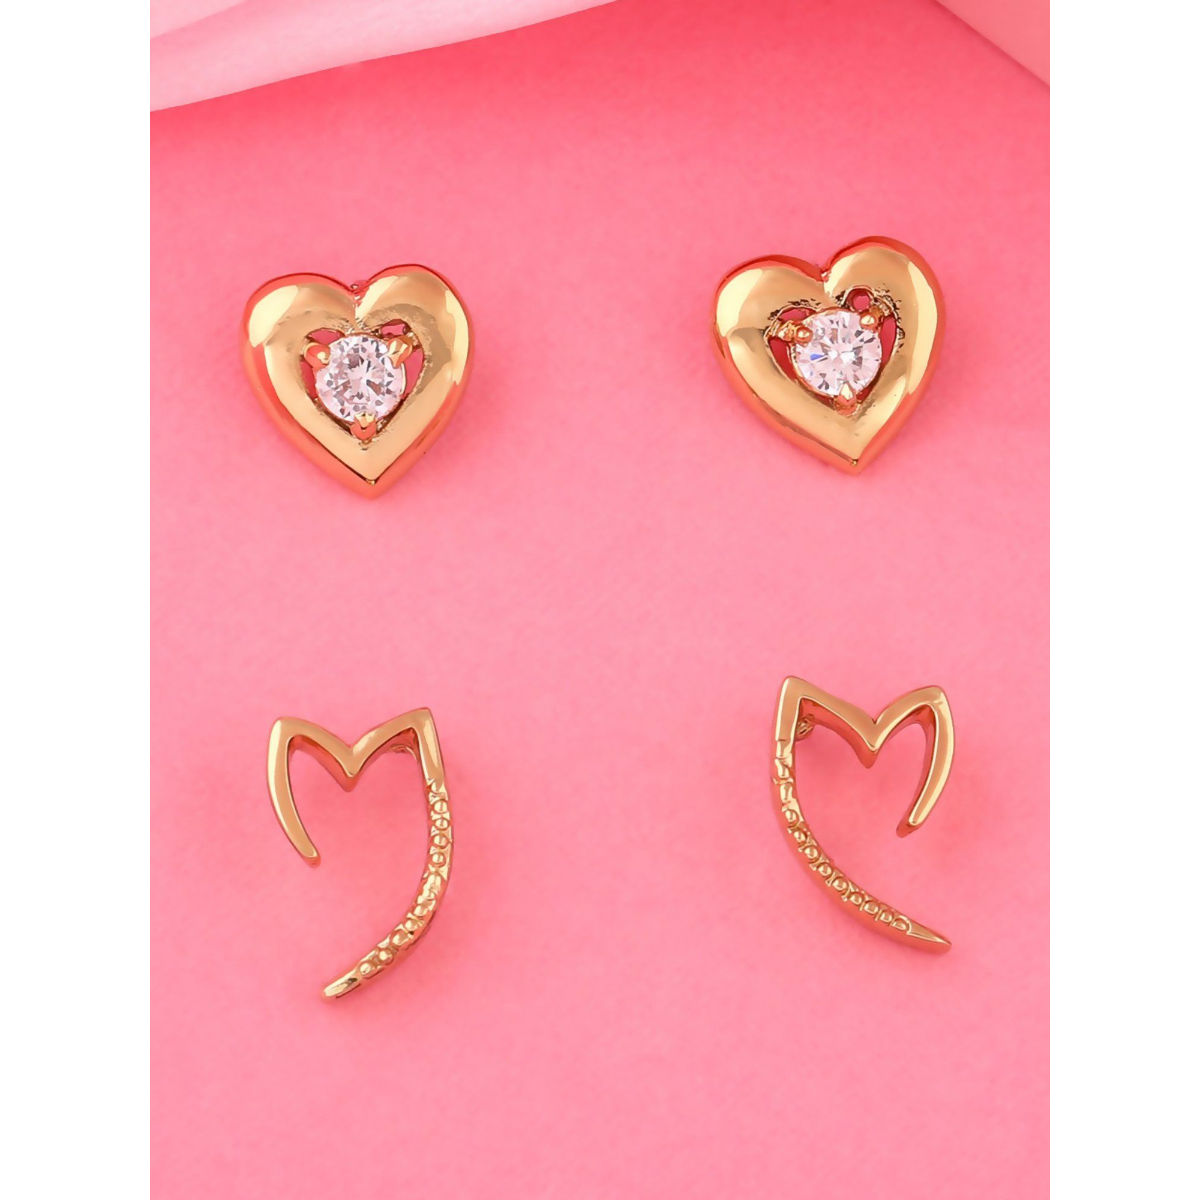 Estele Gold Plated Heart Shaped Earrings For Girls and Women Set of 2  Set of 2 Buy Estele Gold Plated Heart Shaped Earrings For Girls and  Women Set of 2 Set of